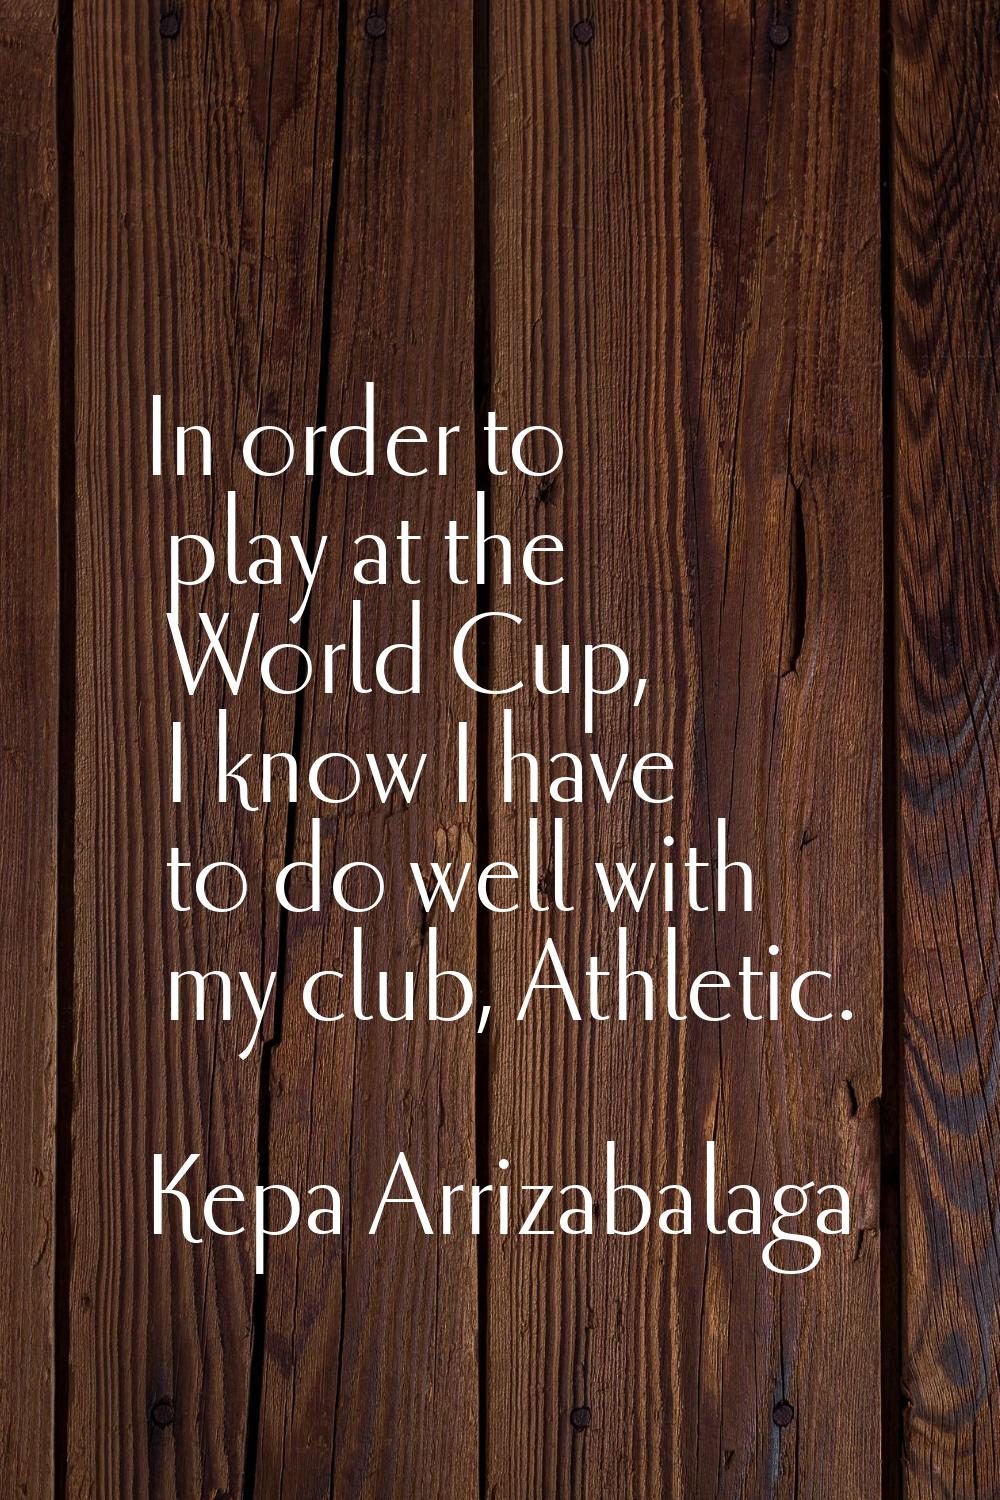 In order to play at the World Cup, I know I have to do well with my club, Athletic.